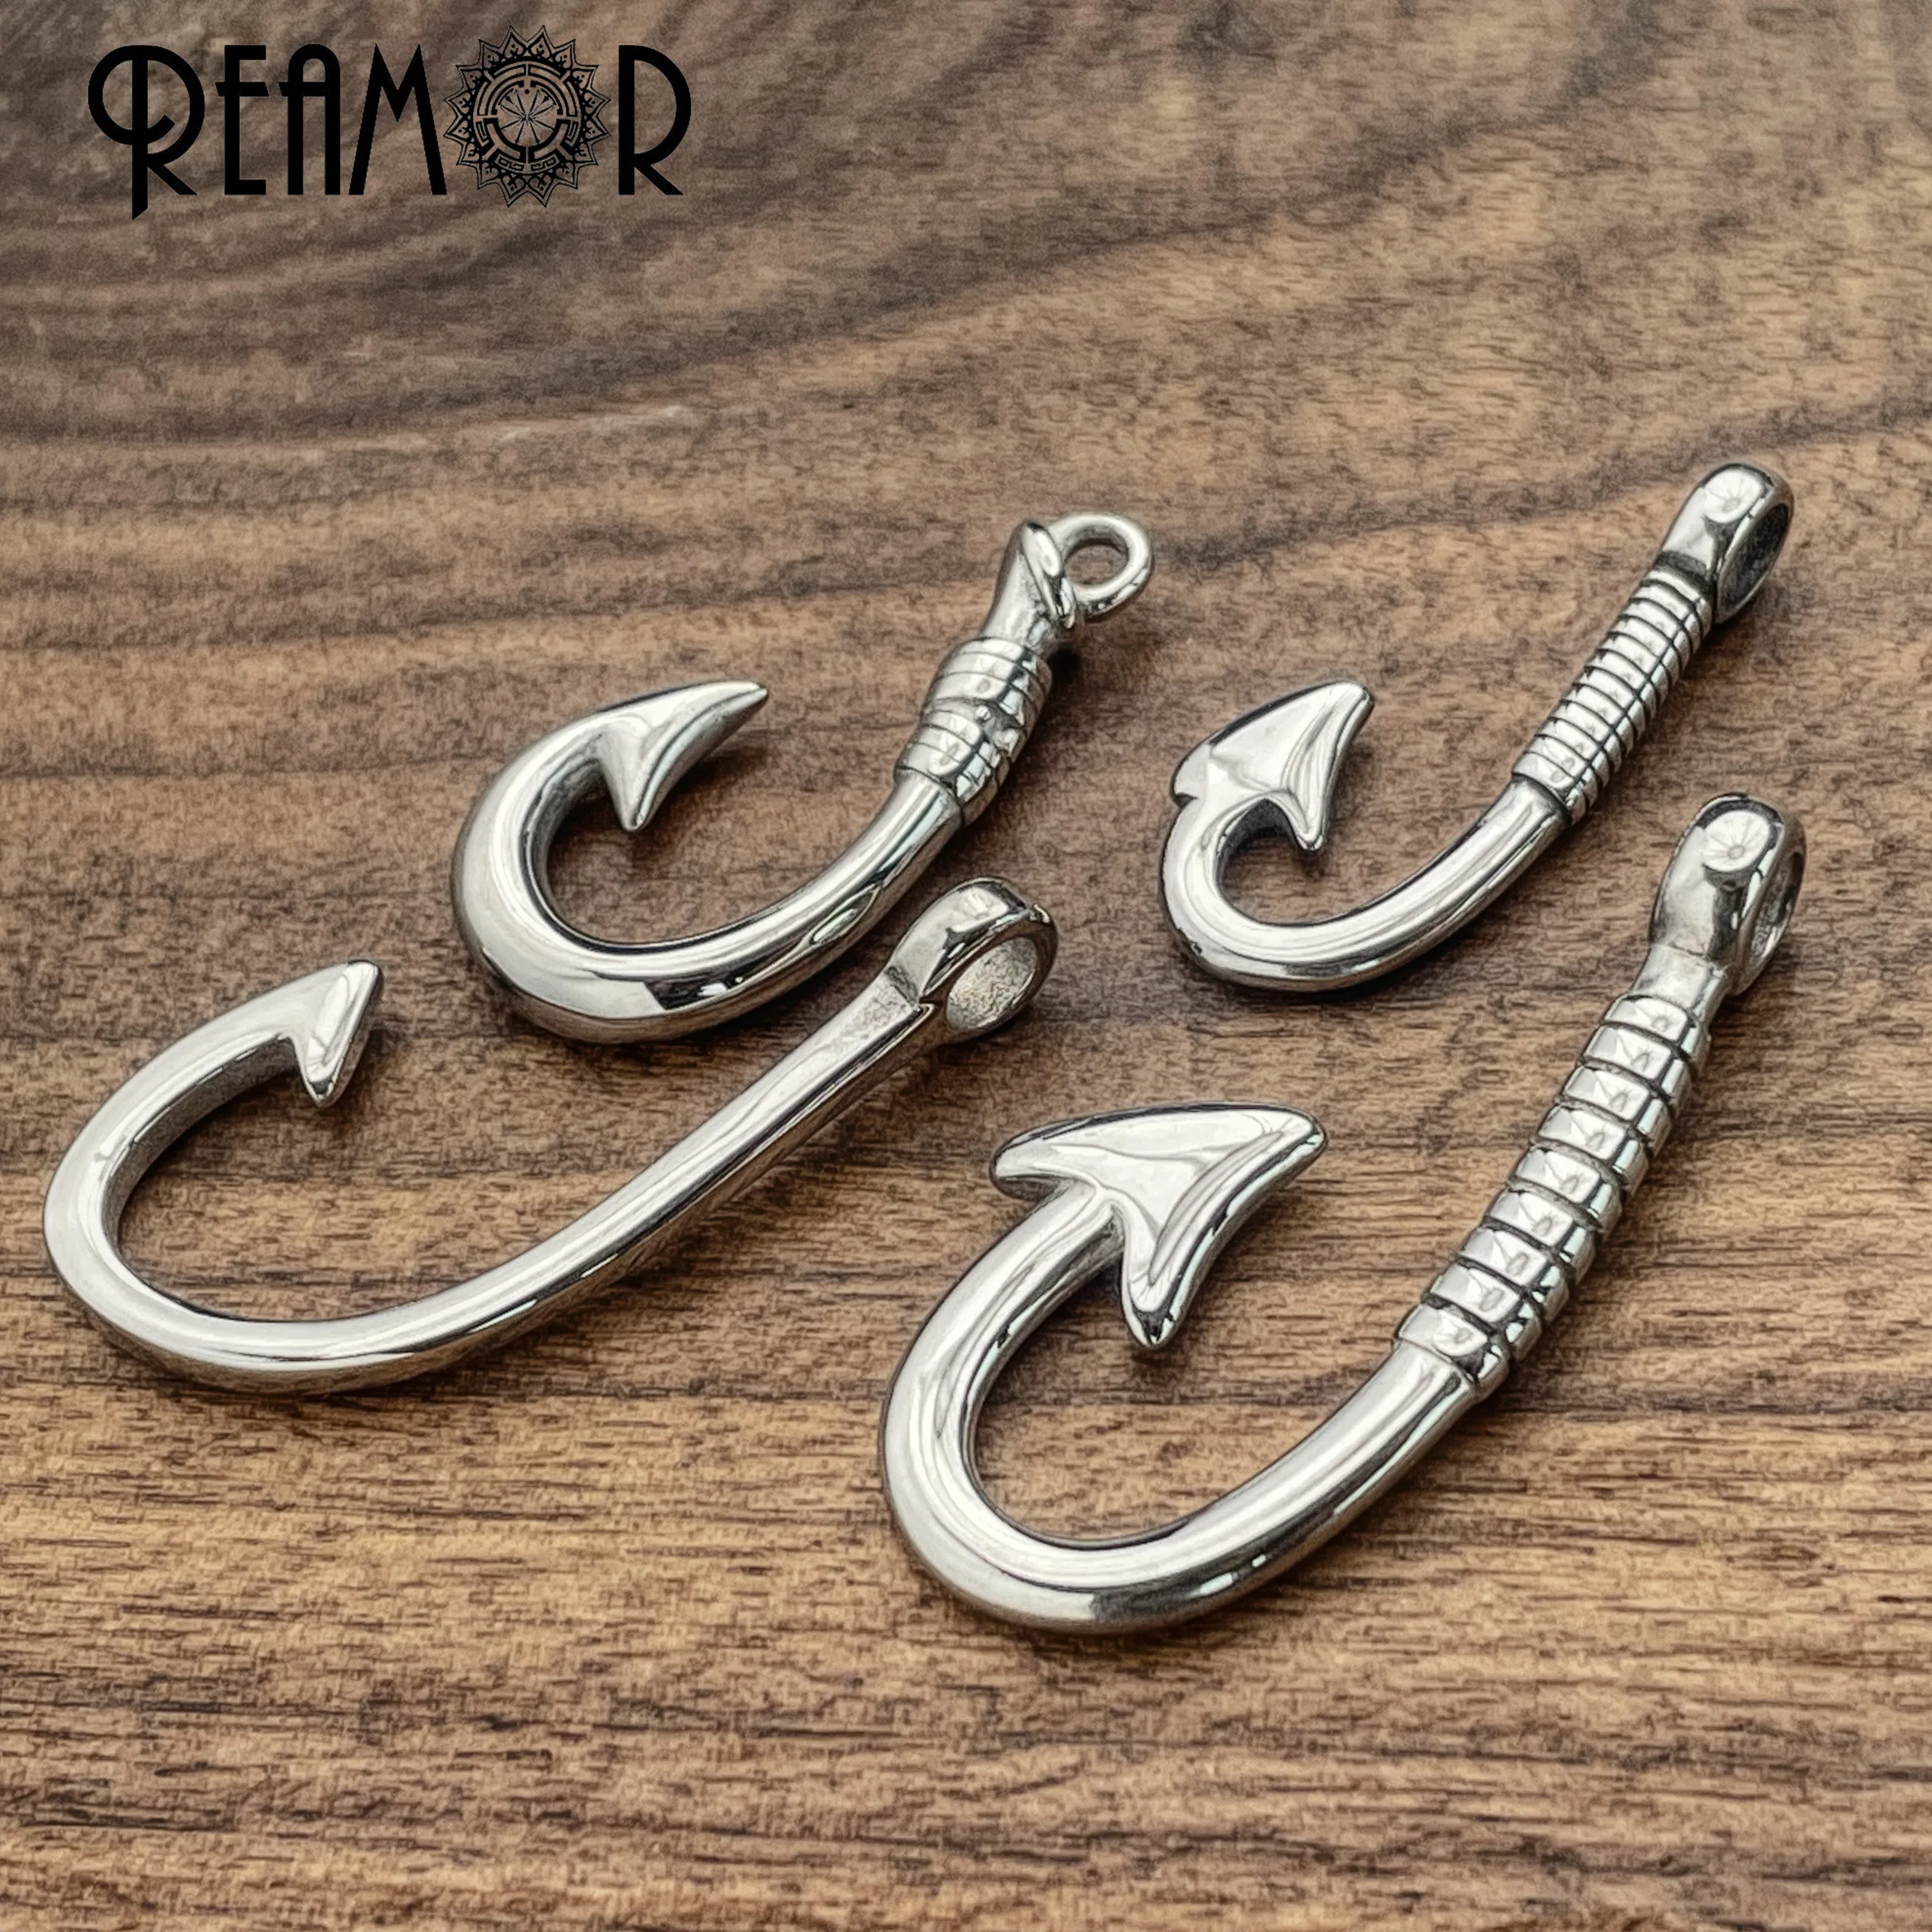 REAMOR 2pc 316L Stainless Steel Fish Hook Leather Bracelet Connectors  Clasps Charms Fit Necklace Pendant DIY Jewelry Accessories